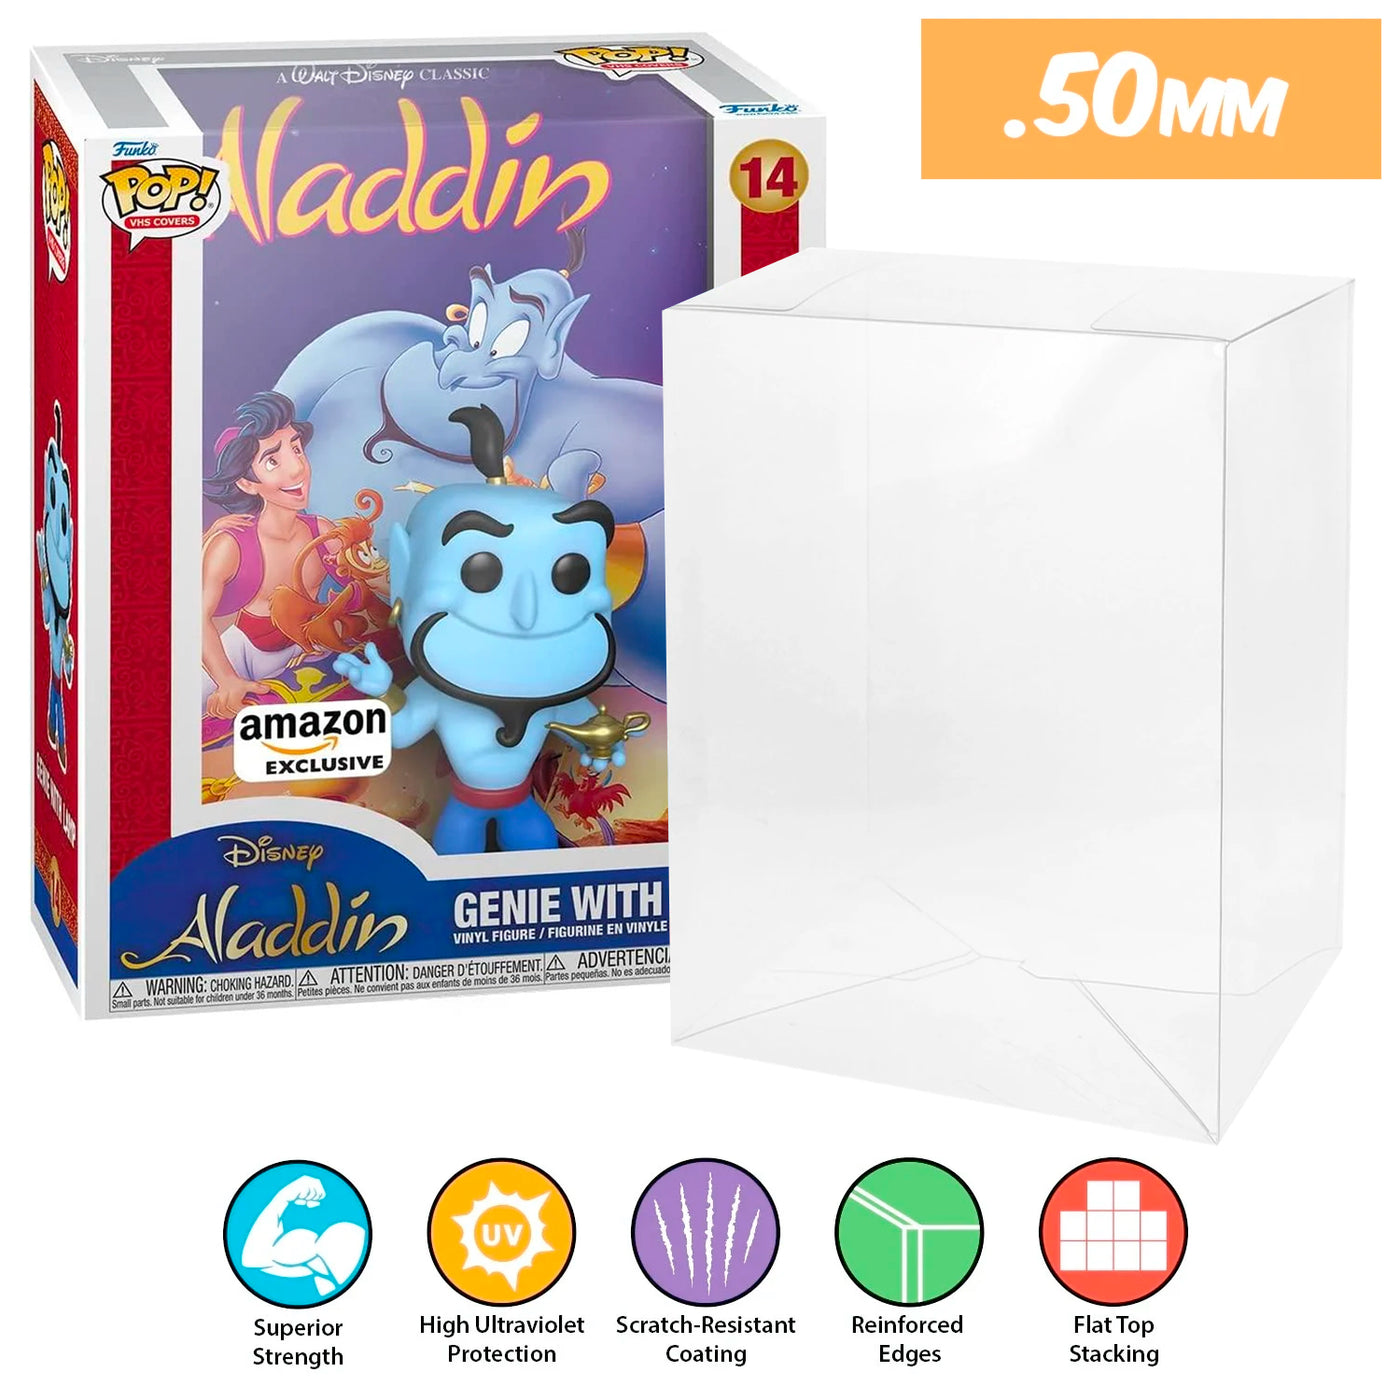 14 aladdin genie with lamp amazon pop vhs covers best funko pop protectors thick strong uv scratch flat top stack vinyl display geek plastic shield vaulted eco armor fits collect protect display case kollector protector